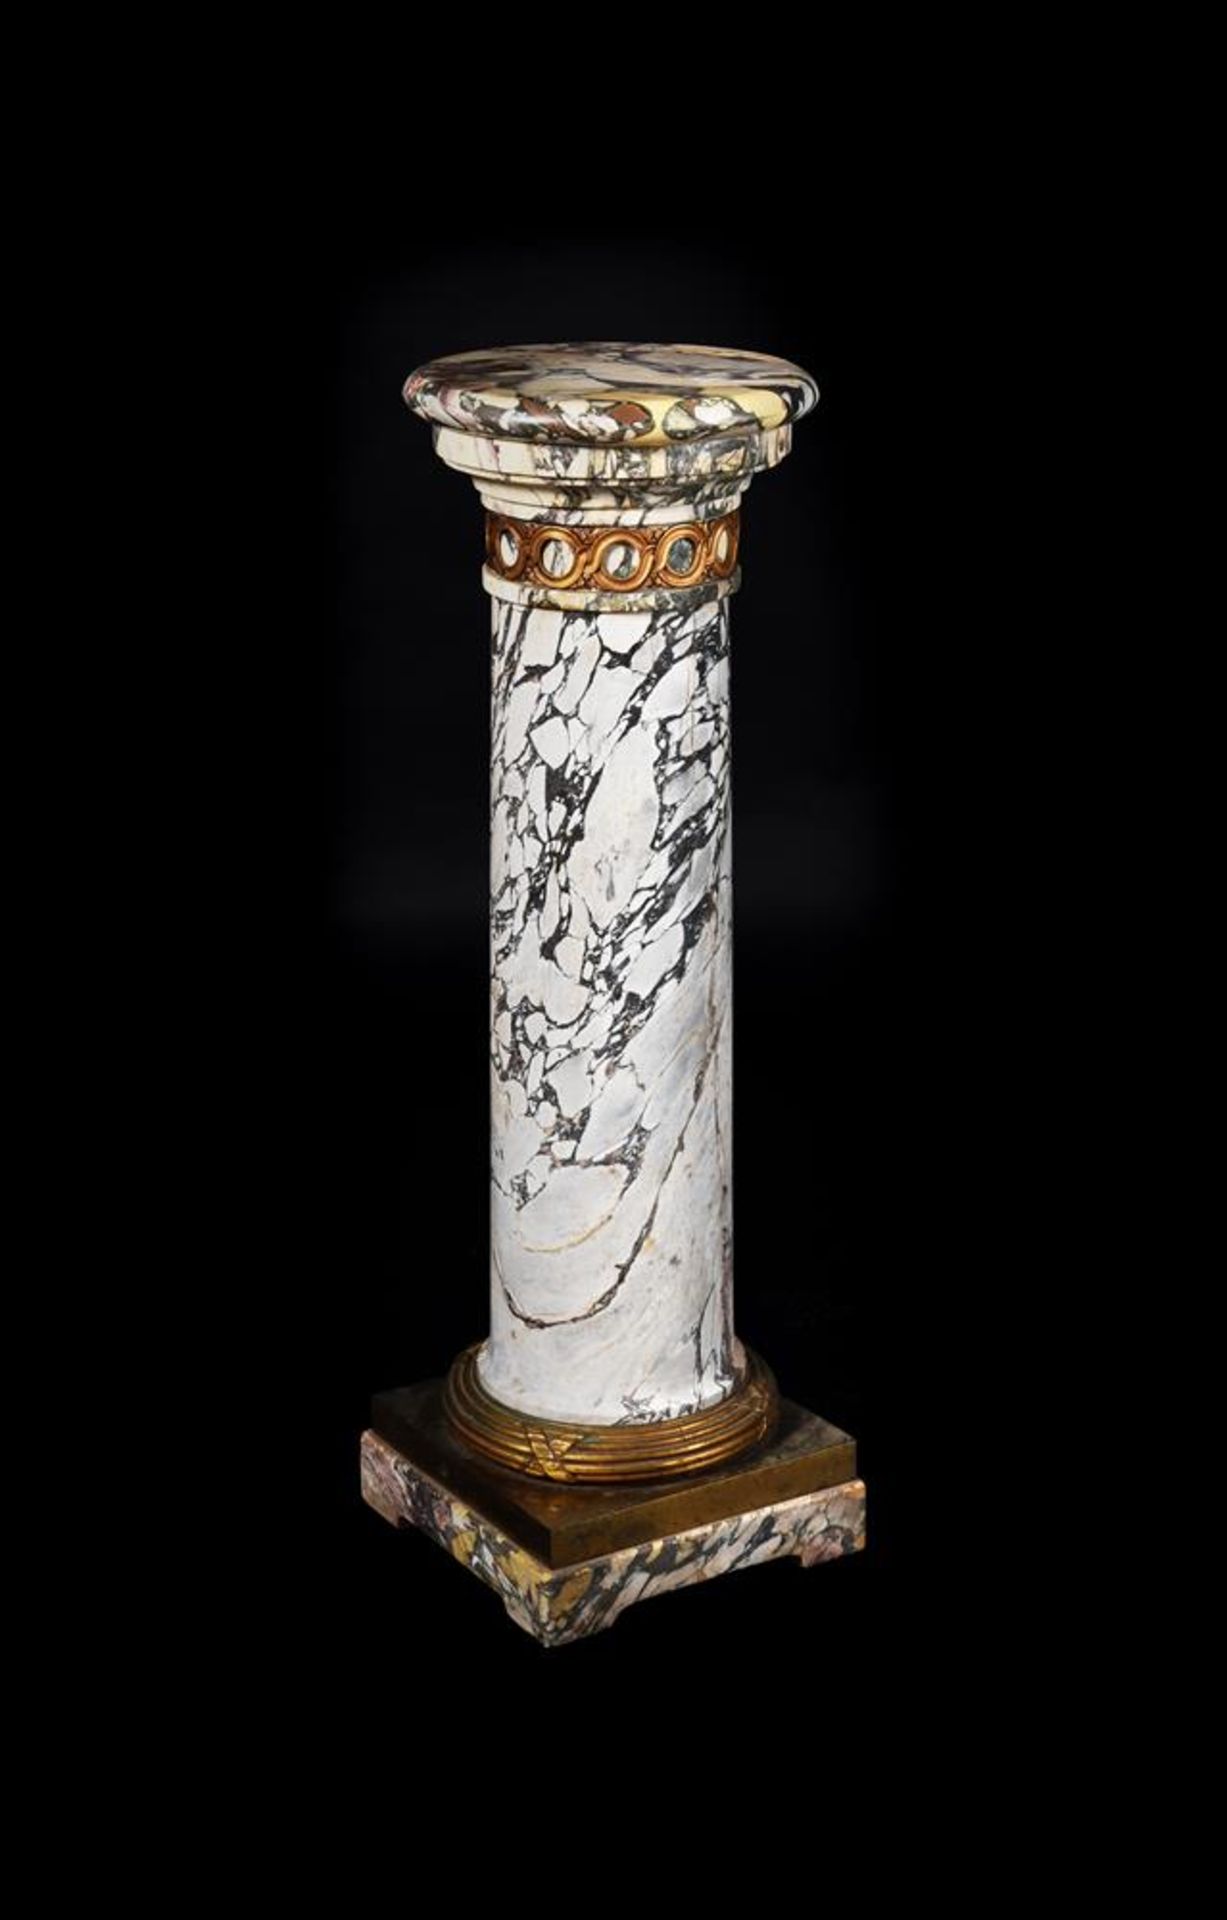 A FRENCH VARIAGATED WHITE MARBLE AND GILT METAL MOUNTED PEDESTAL COLUMN, SECOND HALF 19TH CENTURY